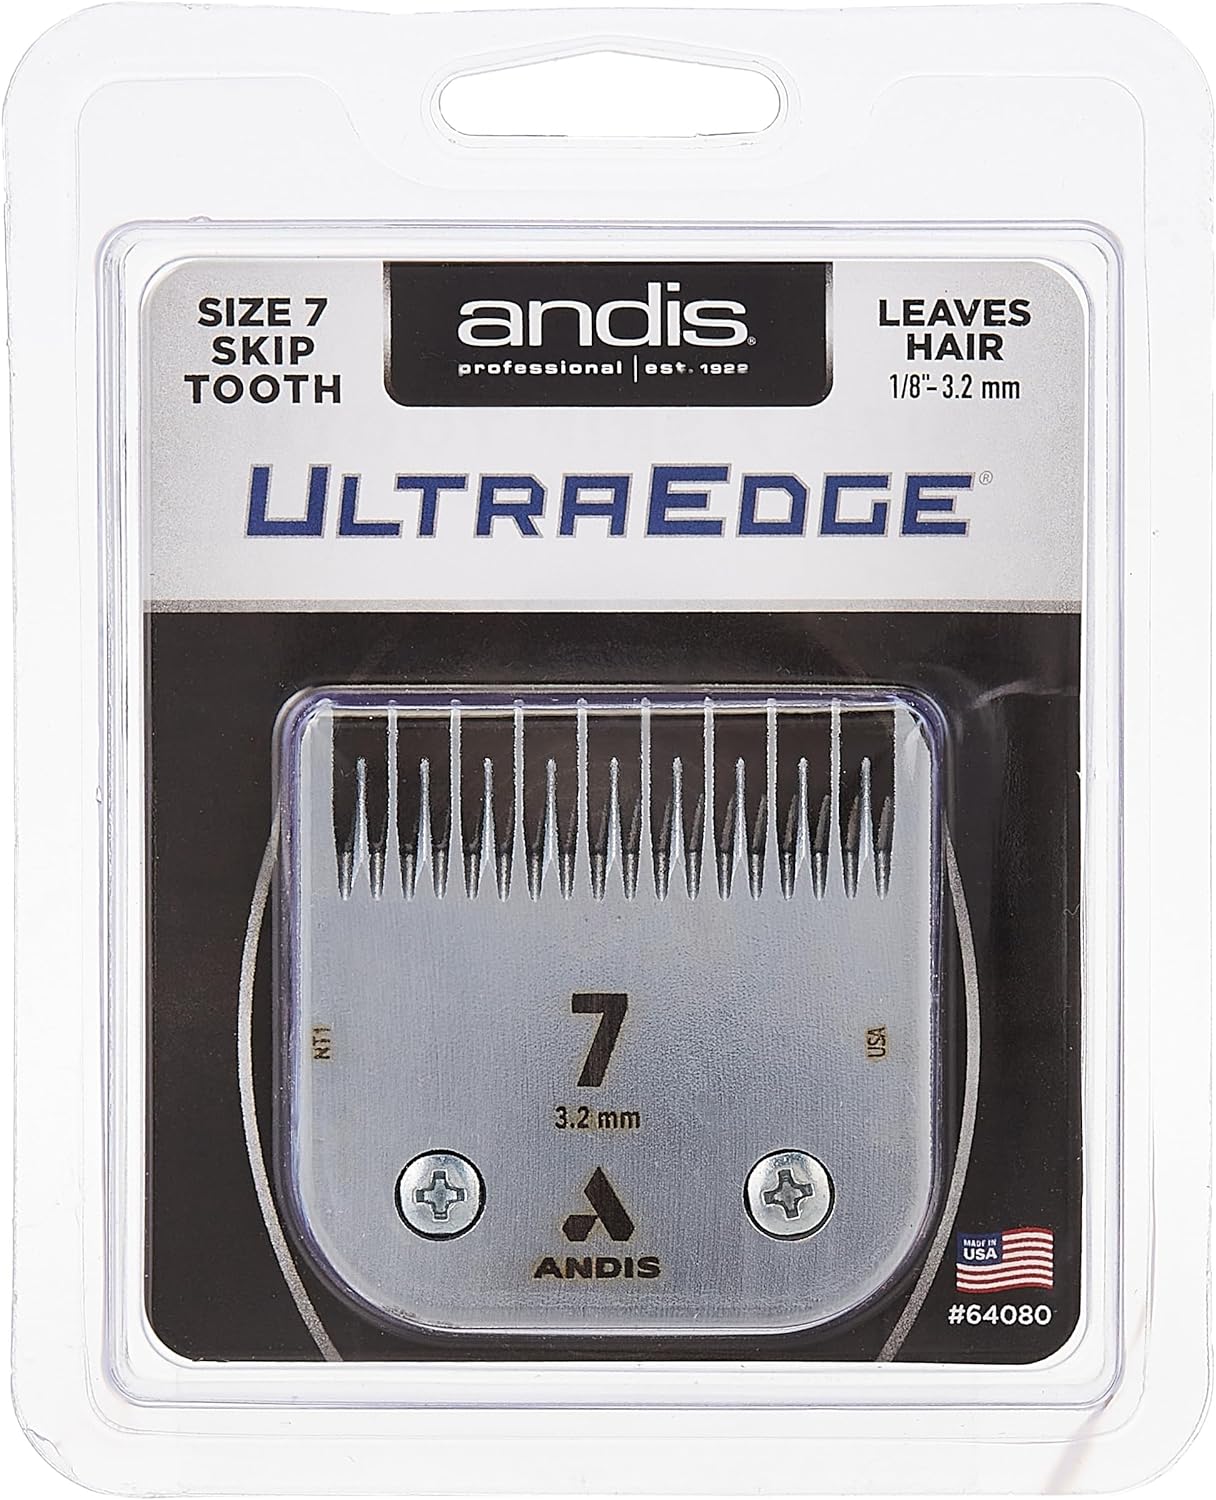 Andis – 64080, Ultra Edge Dog Clipper Blade – Made From High-Carbon Steel With Extended Edge Life, Includes Size-7 Skip Tooth, Harder Cutting Surface With Sharp Edge - 1/8-Inch Cut Length, Chrome